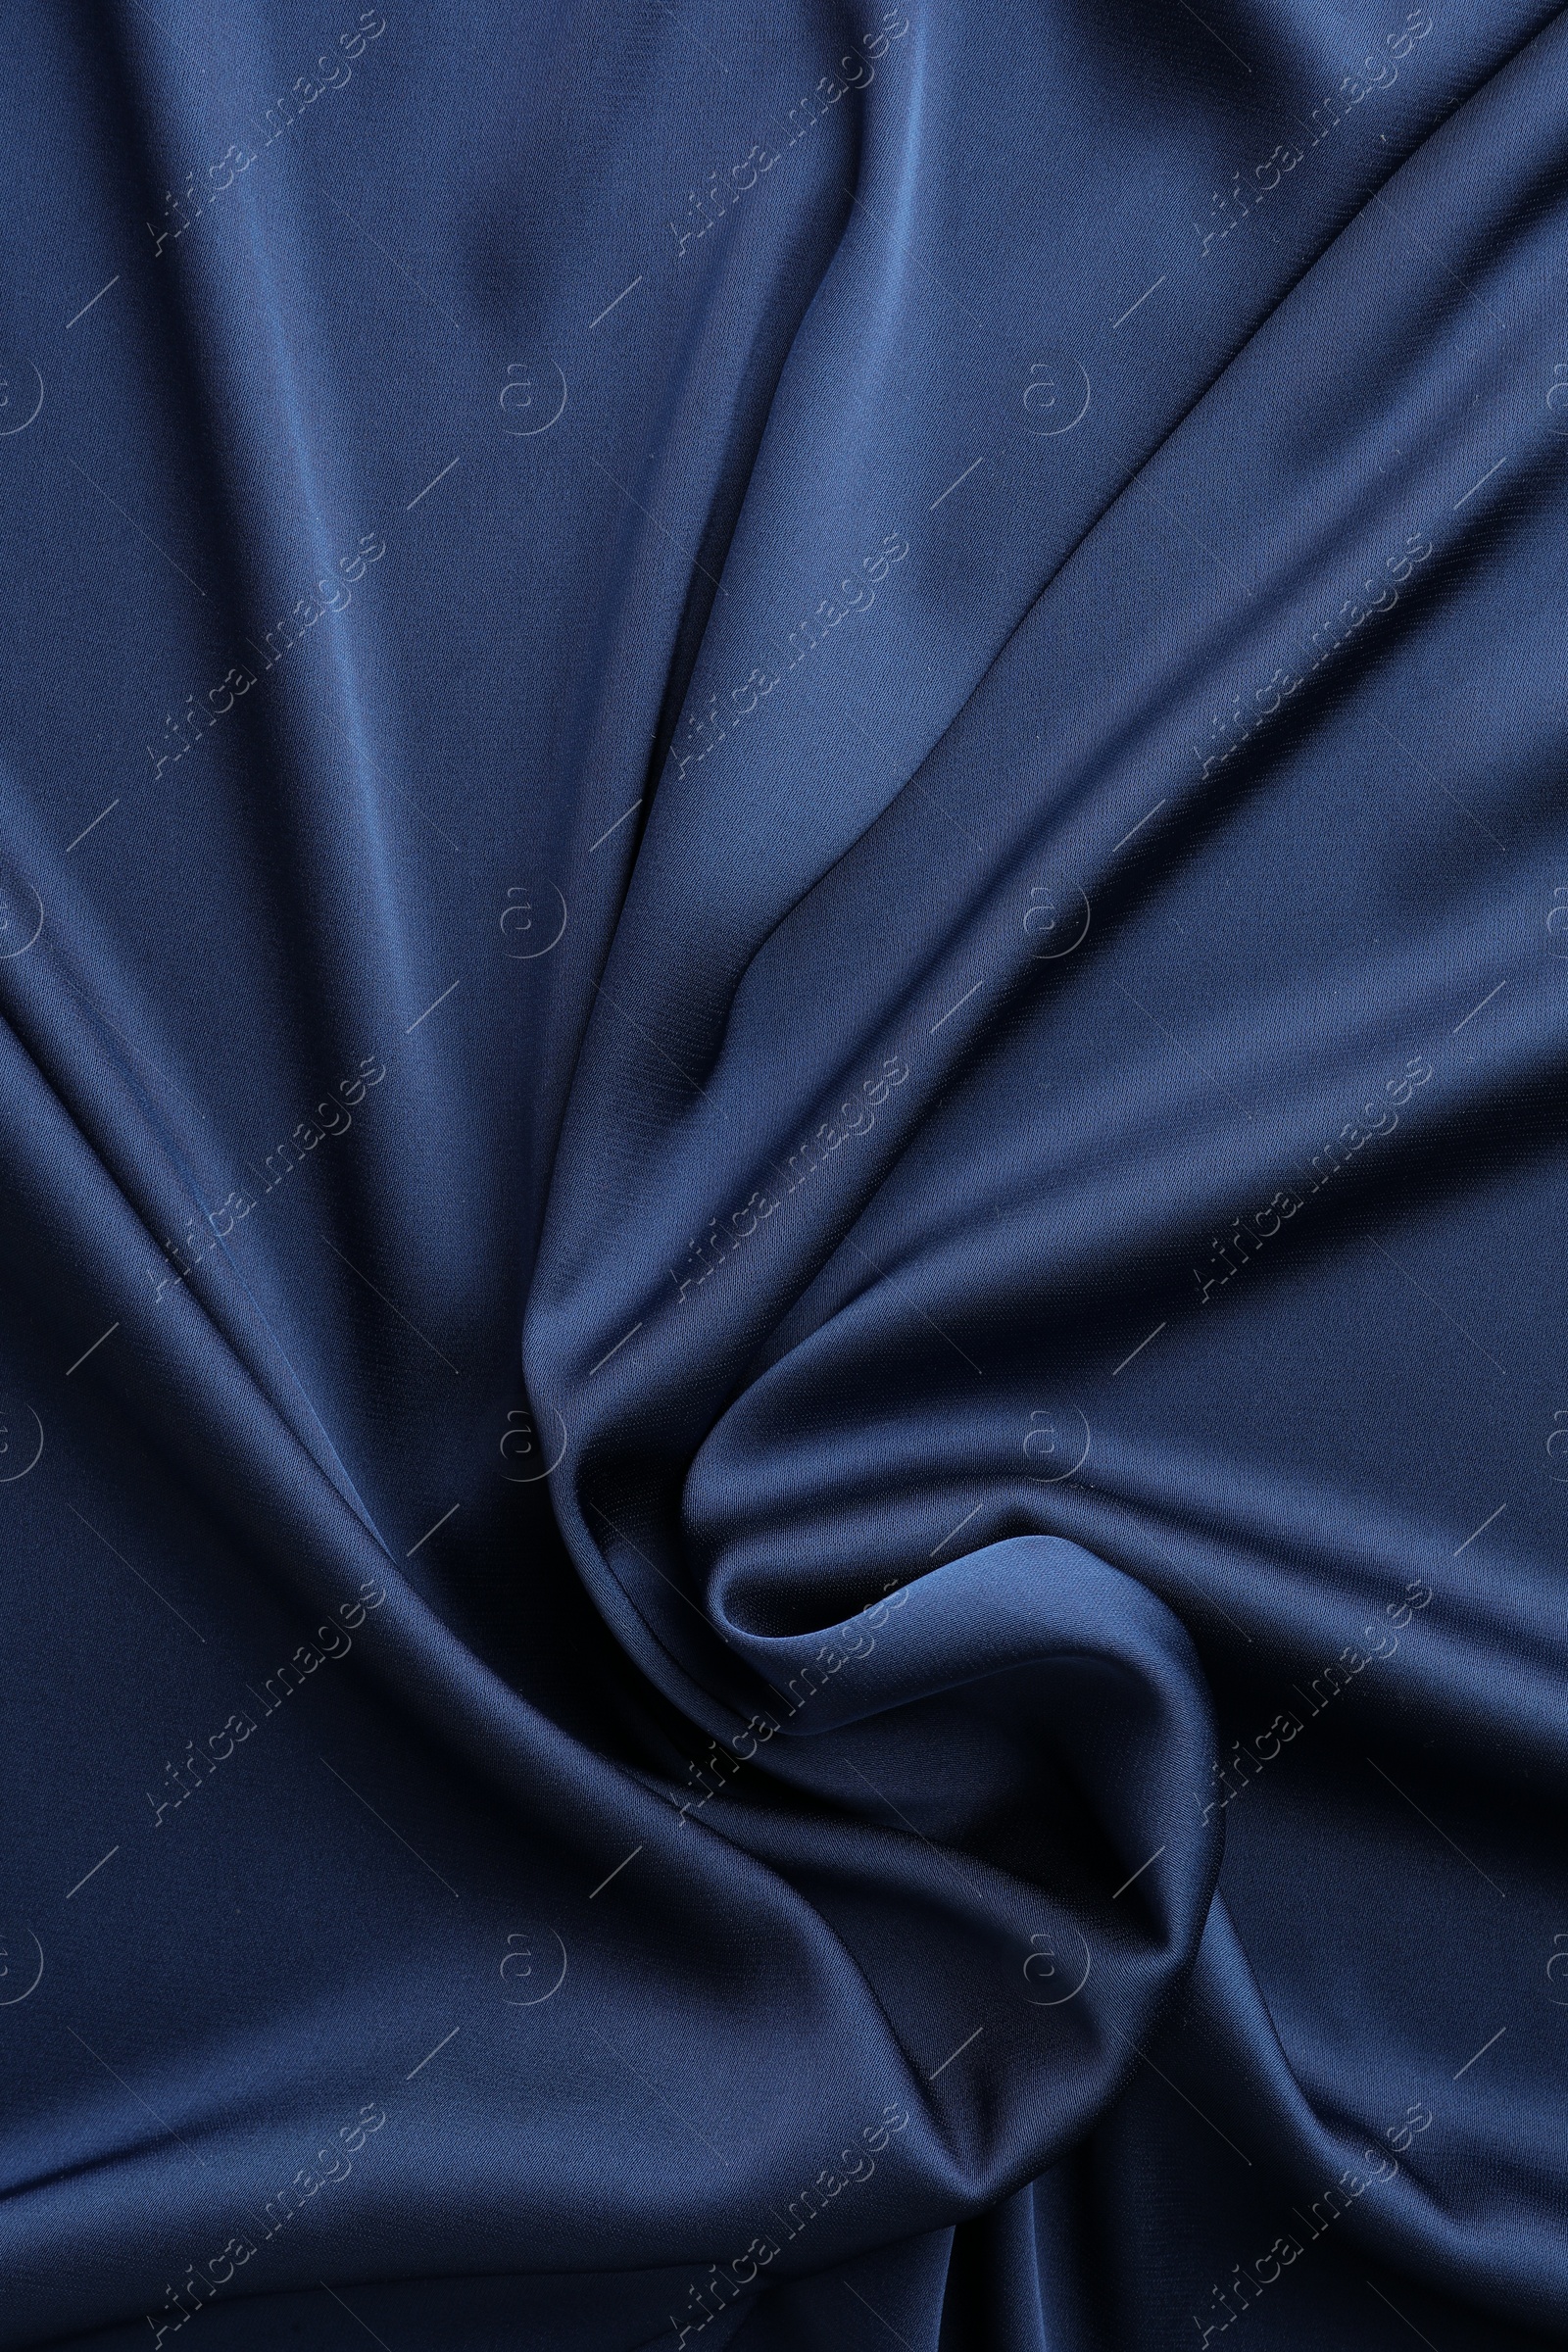 Photo of Texture of blue crumpled silk fabric as background, top view